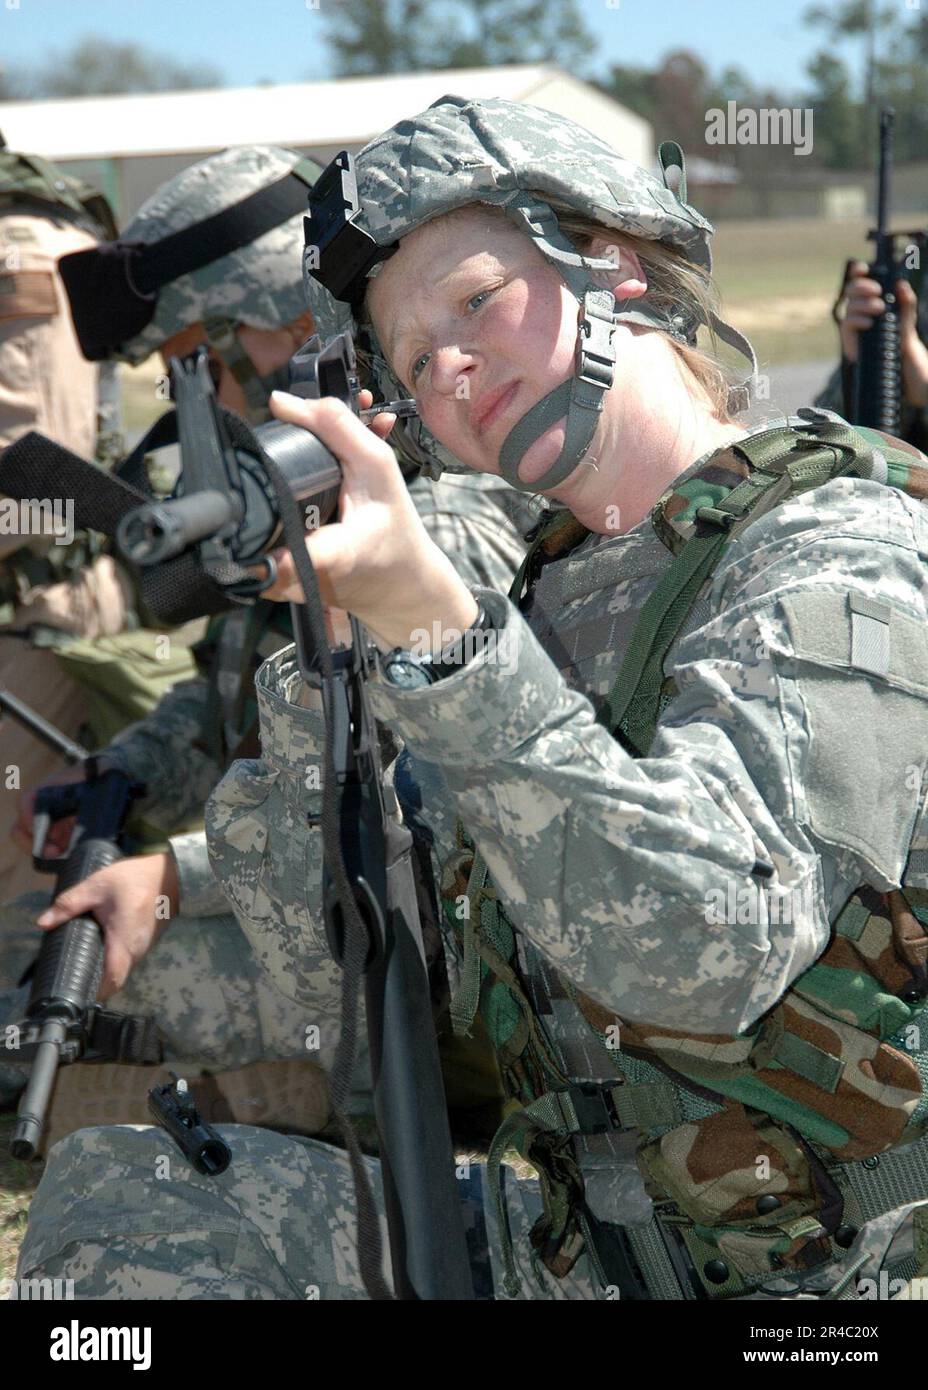 US Navy  Lt. Cdr. assigned to the Naval Inventory Control Point (NAVICP), Philadelphia, inspects the muzzle of her M16A1 rifle during an Individual Augmentee Training Course at the McCrady Traini. Stock Photo